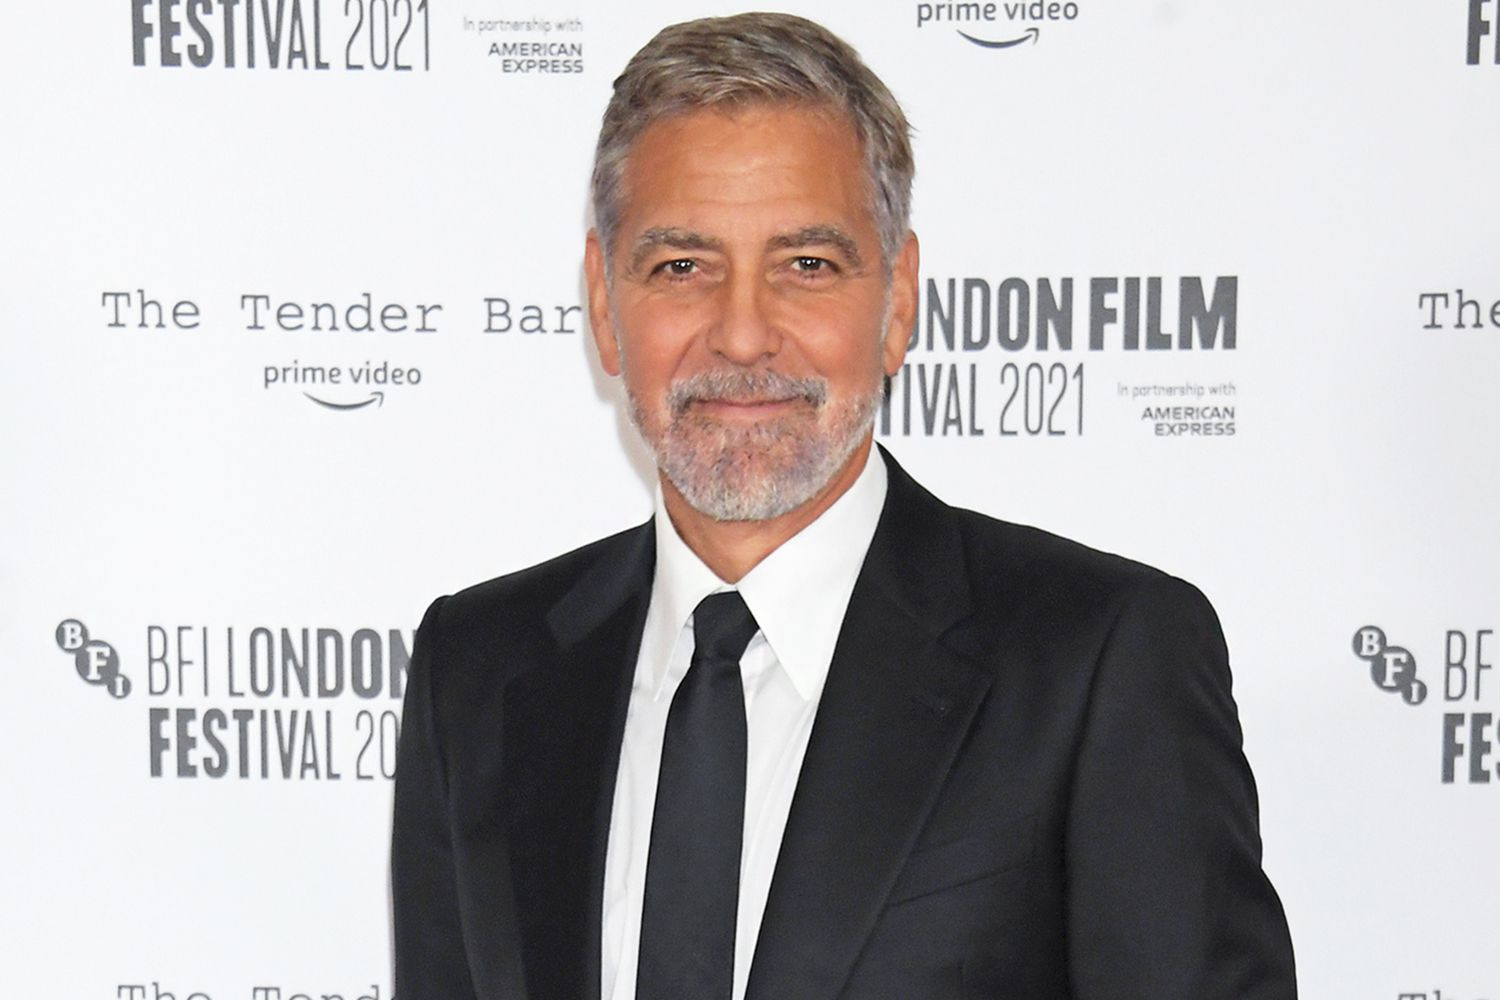 George Clooney attends the Premiere of "The Tender Bar" during the 65th BFI London Film Festival at The Royal Festival Hall on October 10, 2021 in London, England.